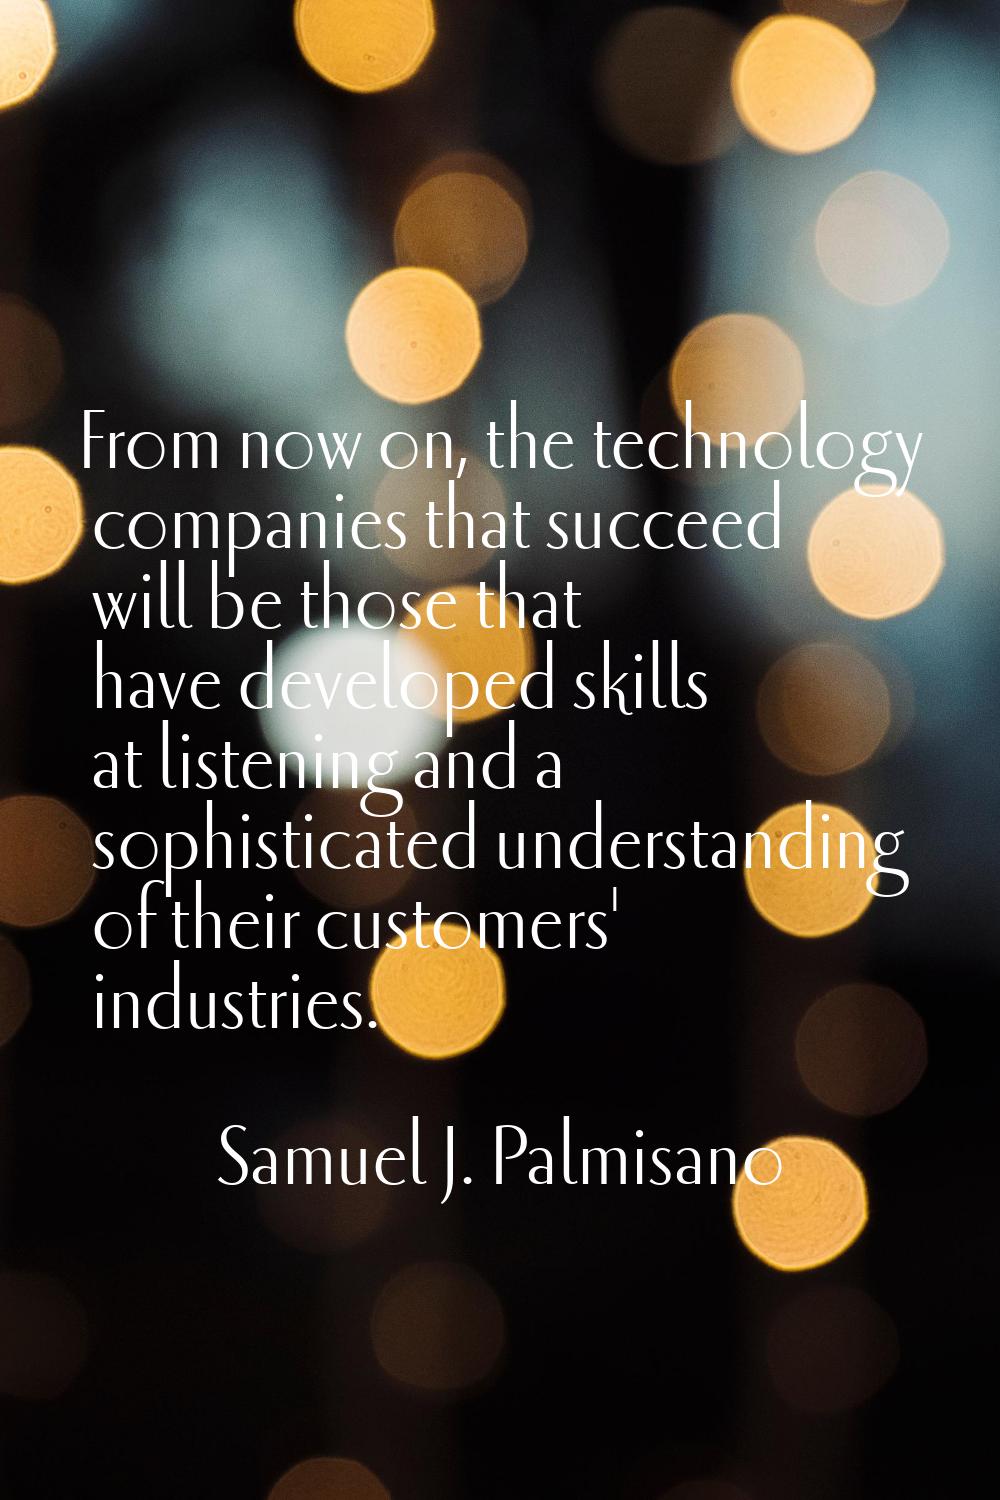 From now on, the technology companies that succeed will be those that have developed skills at list